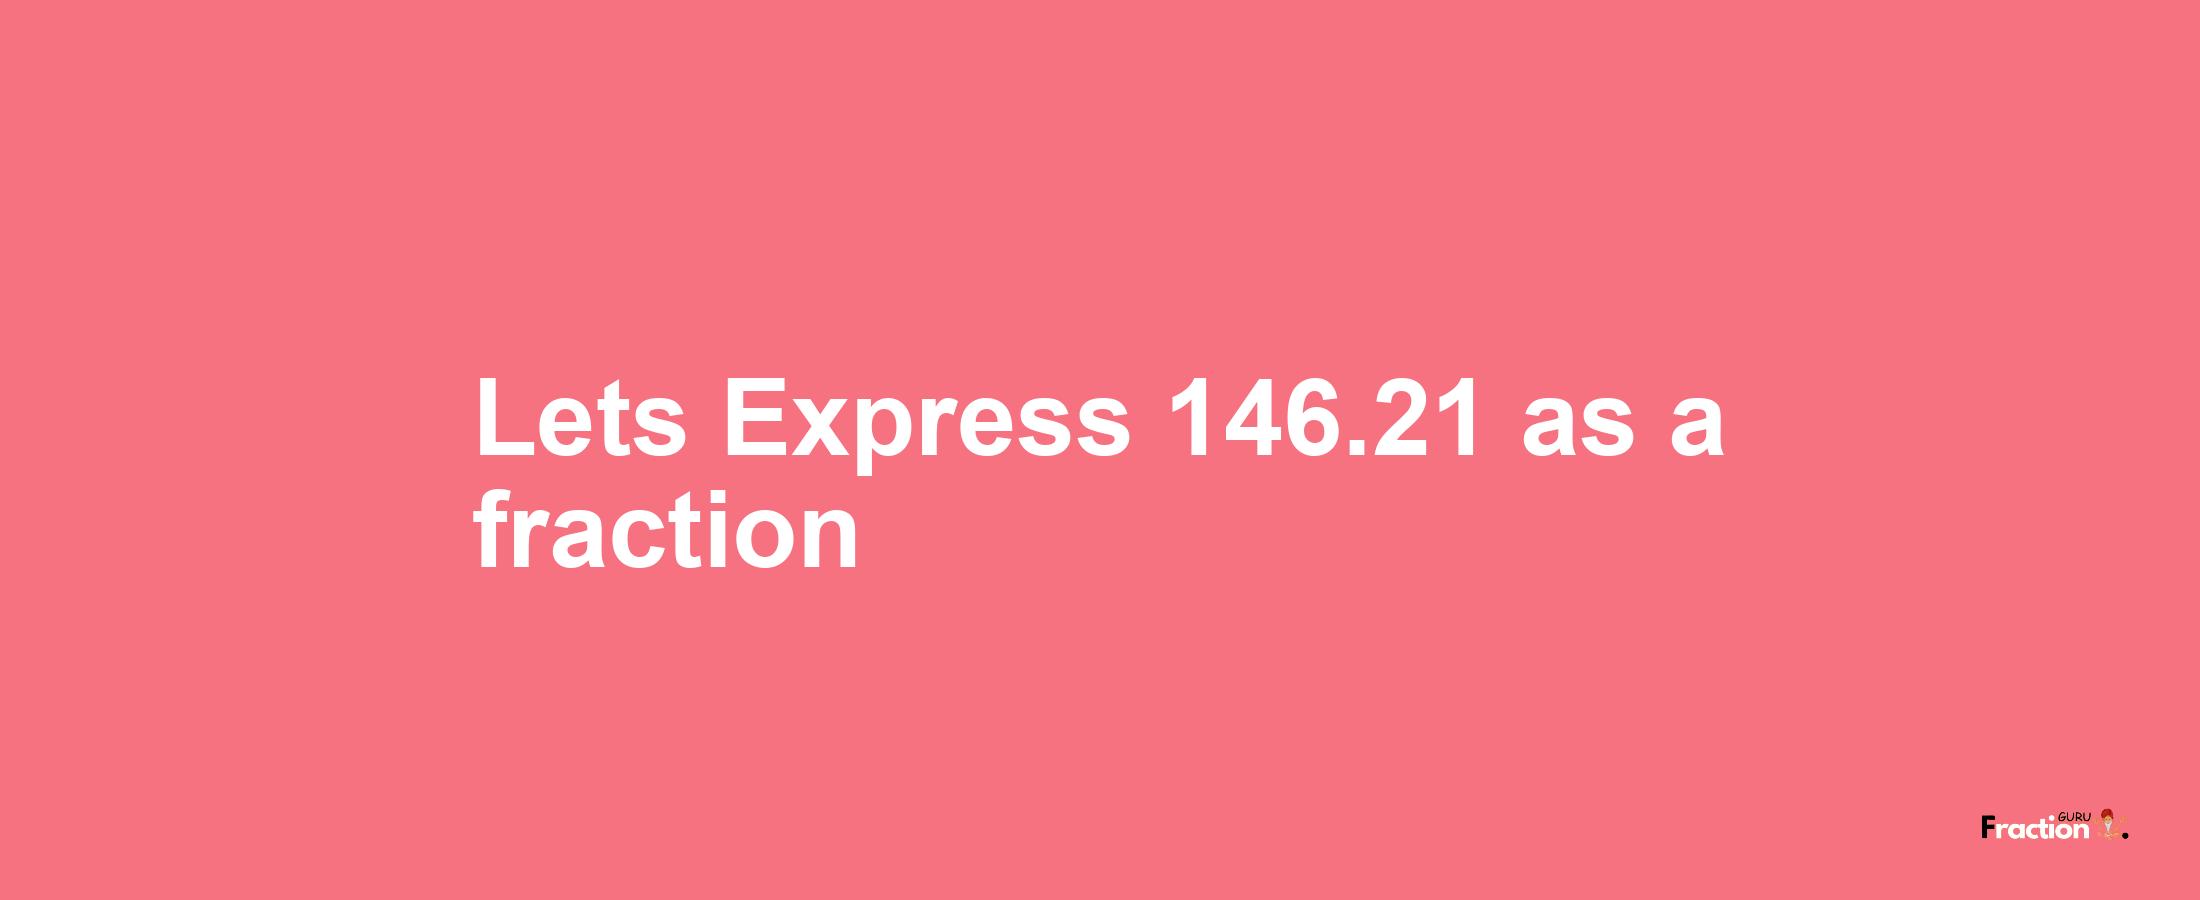 Lets Express 146.21 as afraction